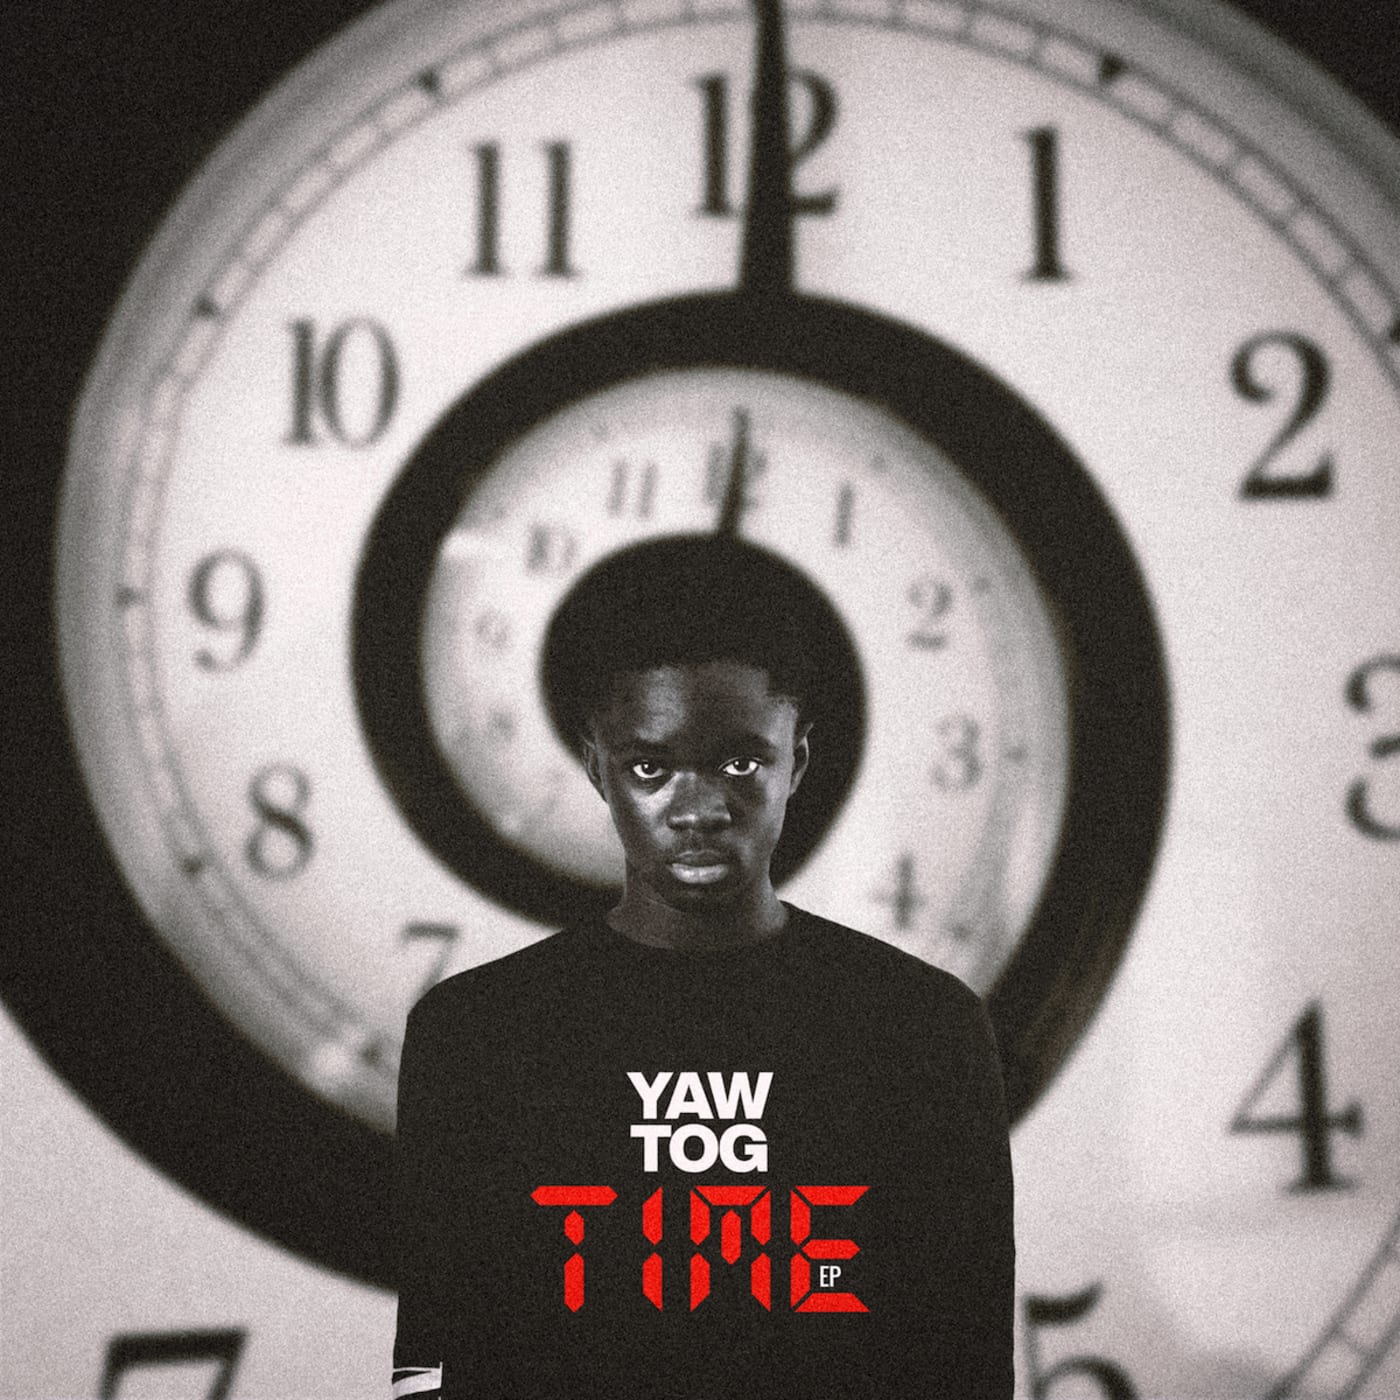 Asakaa Star Yaw Tog Returns With Triumphant ‘TIME’ EP